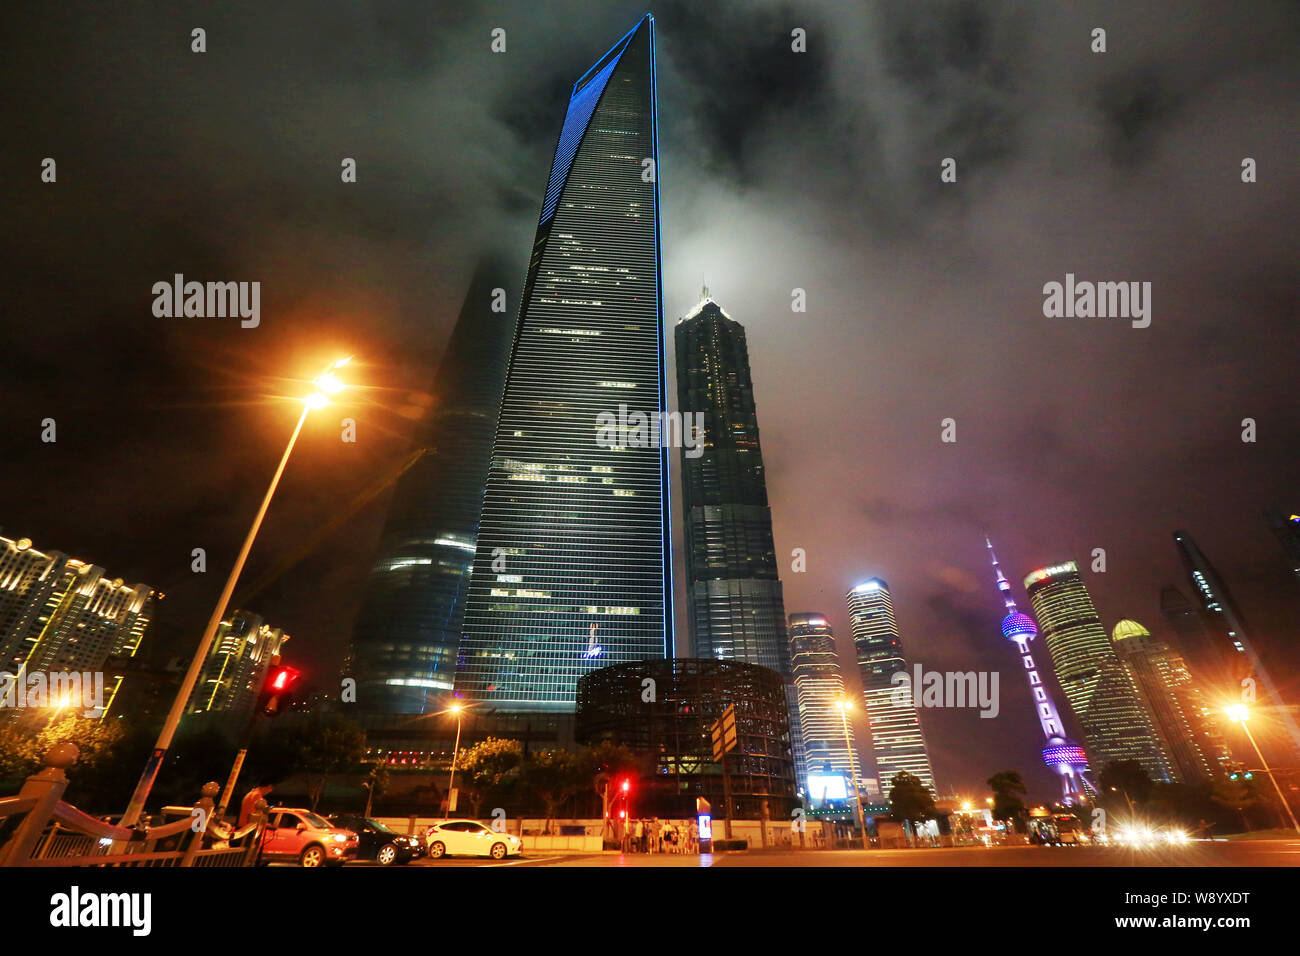 Night view of the Shanghai Tower under construction, tallest left, the Shanghai World Financial Center (SWFC), tallest center, the Jinmao Tower, talle Stock Photo